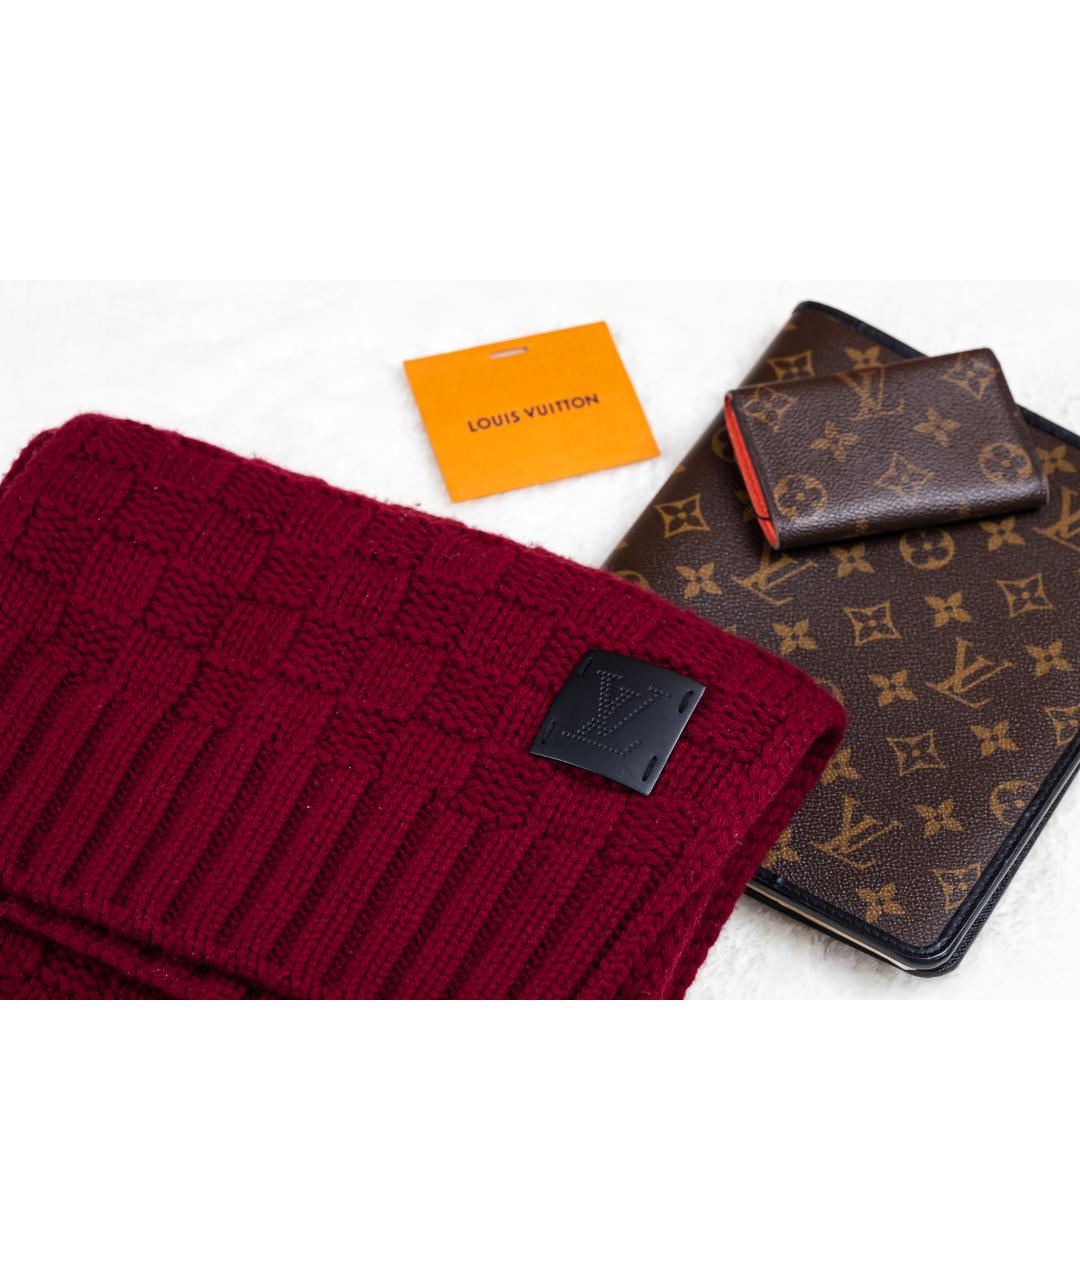 LOUIS VUITTON PRE-OWNED Бордовый кашемировый шарф, фото 3